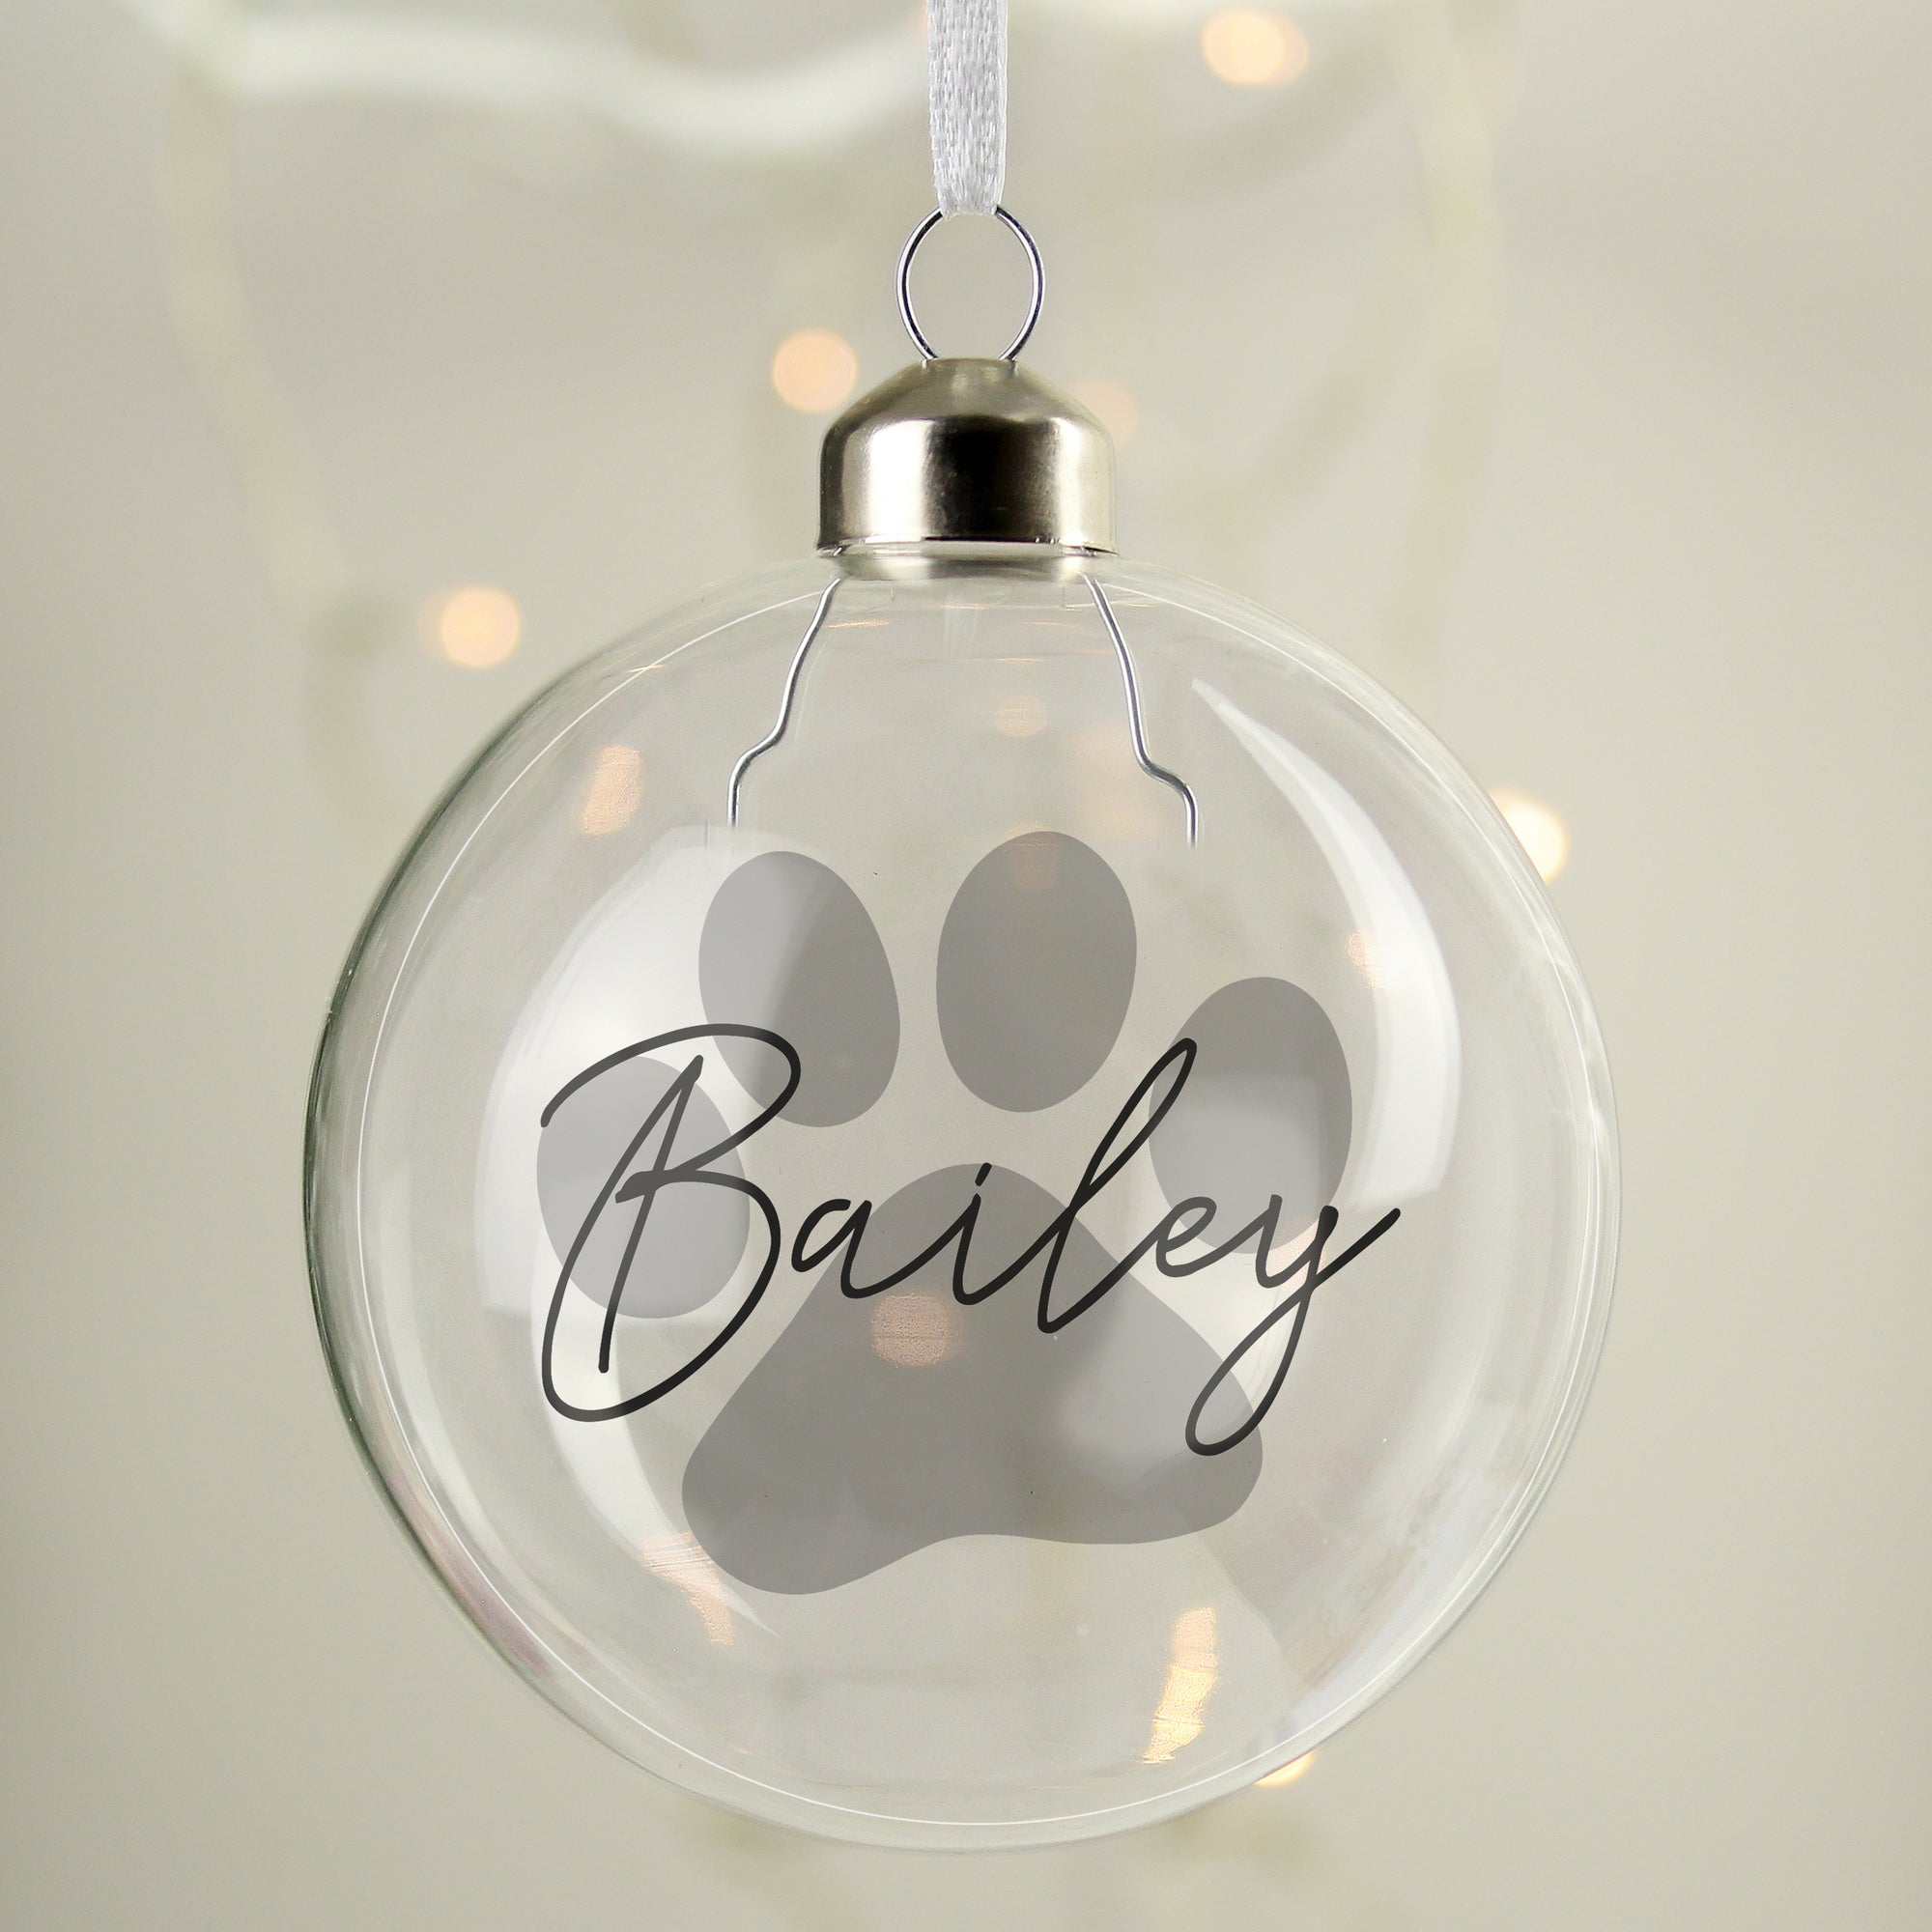 Image of a glass Christmas bauble for a pet with a large paw print design in grey. The bauble can be personalised with a name of your choice which will be printed in a black handwriting font across the paw print.